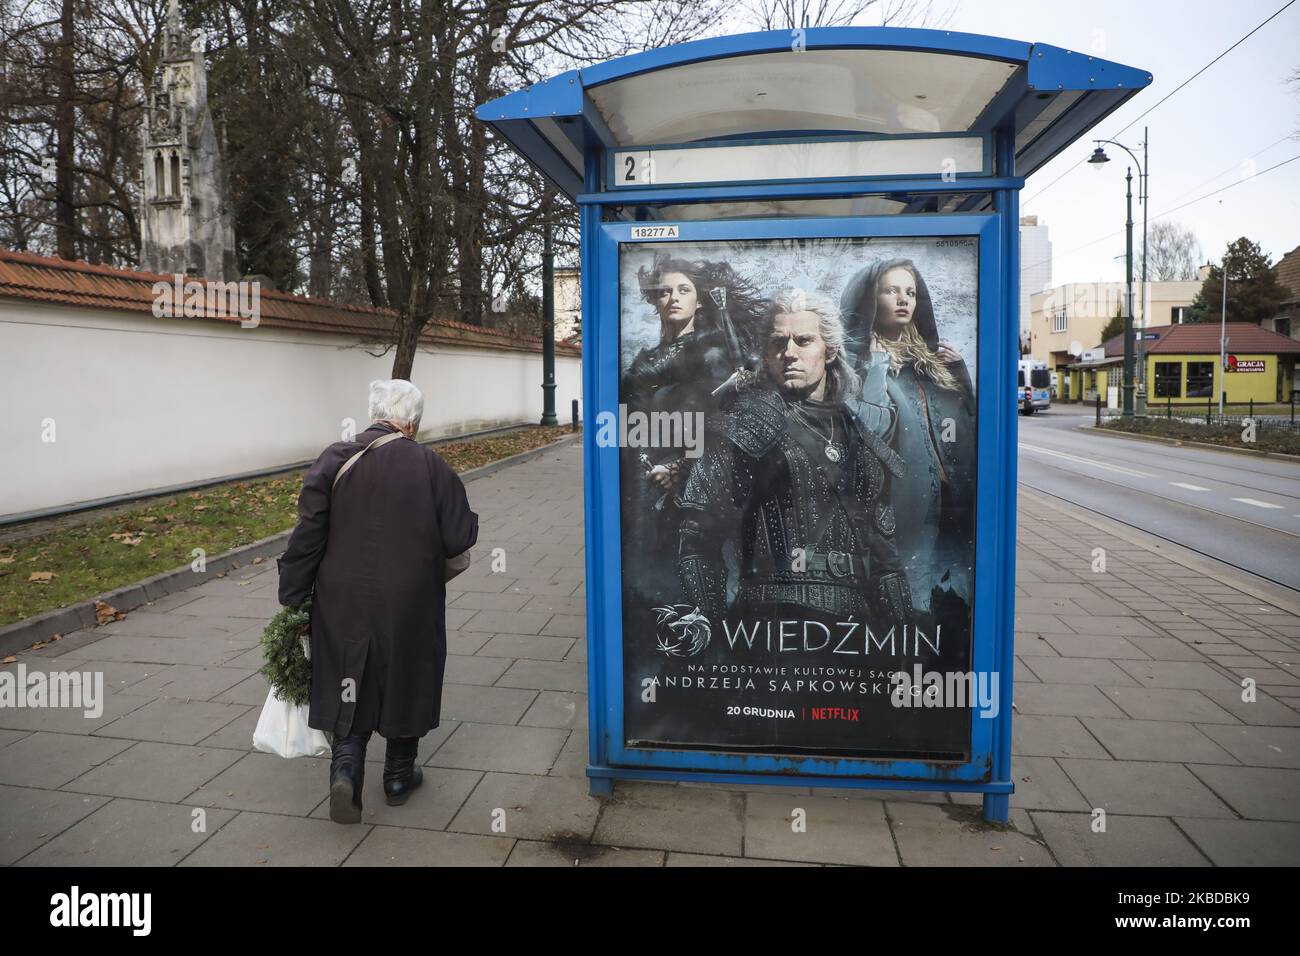 A poster promoting 'The Witcher' Netflix television series is seen at a bus stop in Krakow, Poland on 20 December, 2019. Netflix 'The Witcher' (Polish: Wiedzmin) created by Lauren Schmidt Hissrich and starring Henry Cavill, Anya Chalotra and Freya Allan is based on the book series of the same name by Polish writer Andrzej Sapkowski. (Photo by Beata Zawrzel/NurPhoto) Foto Stock